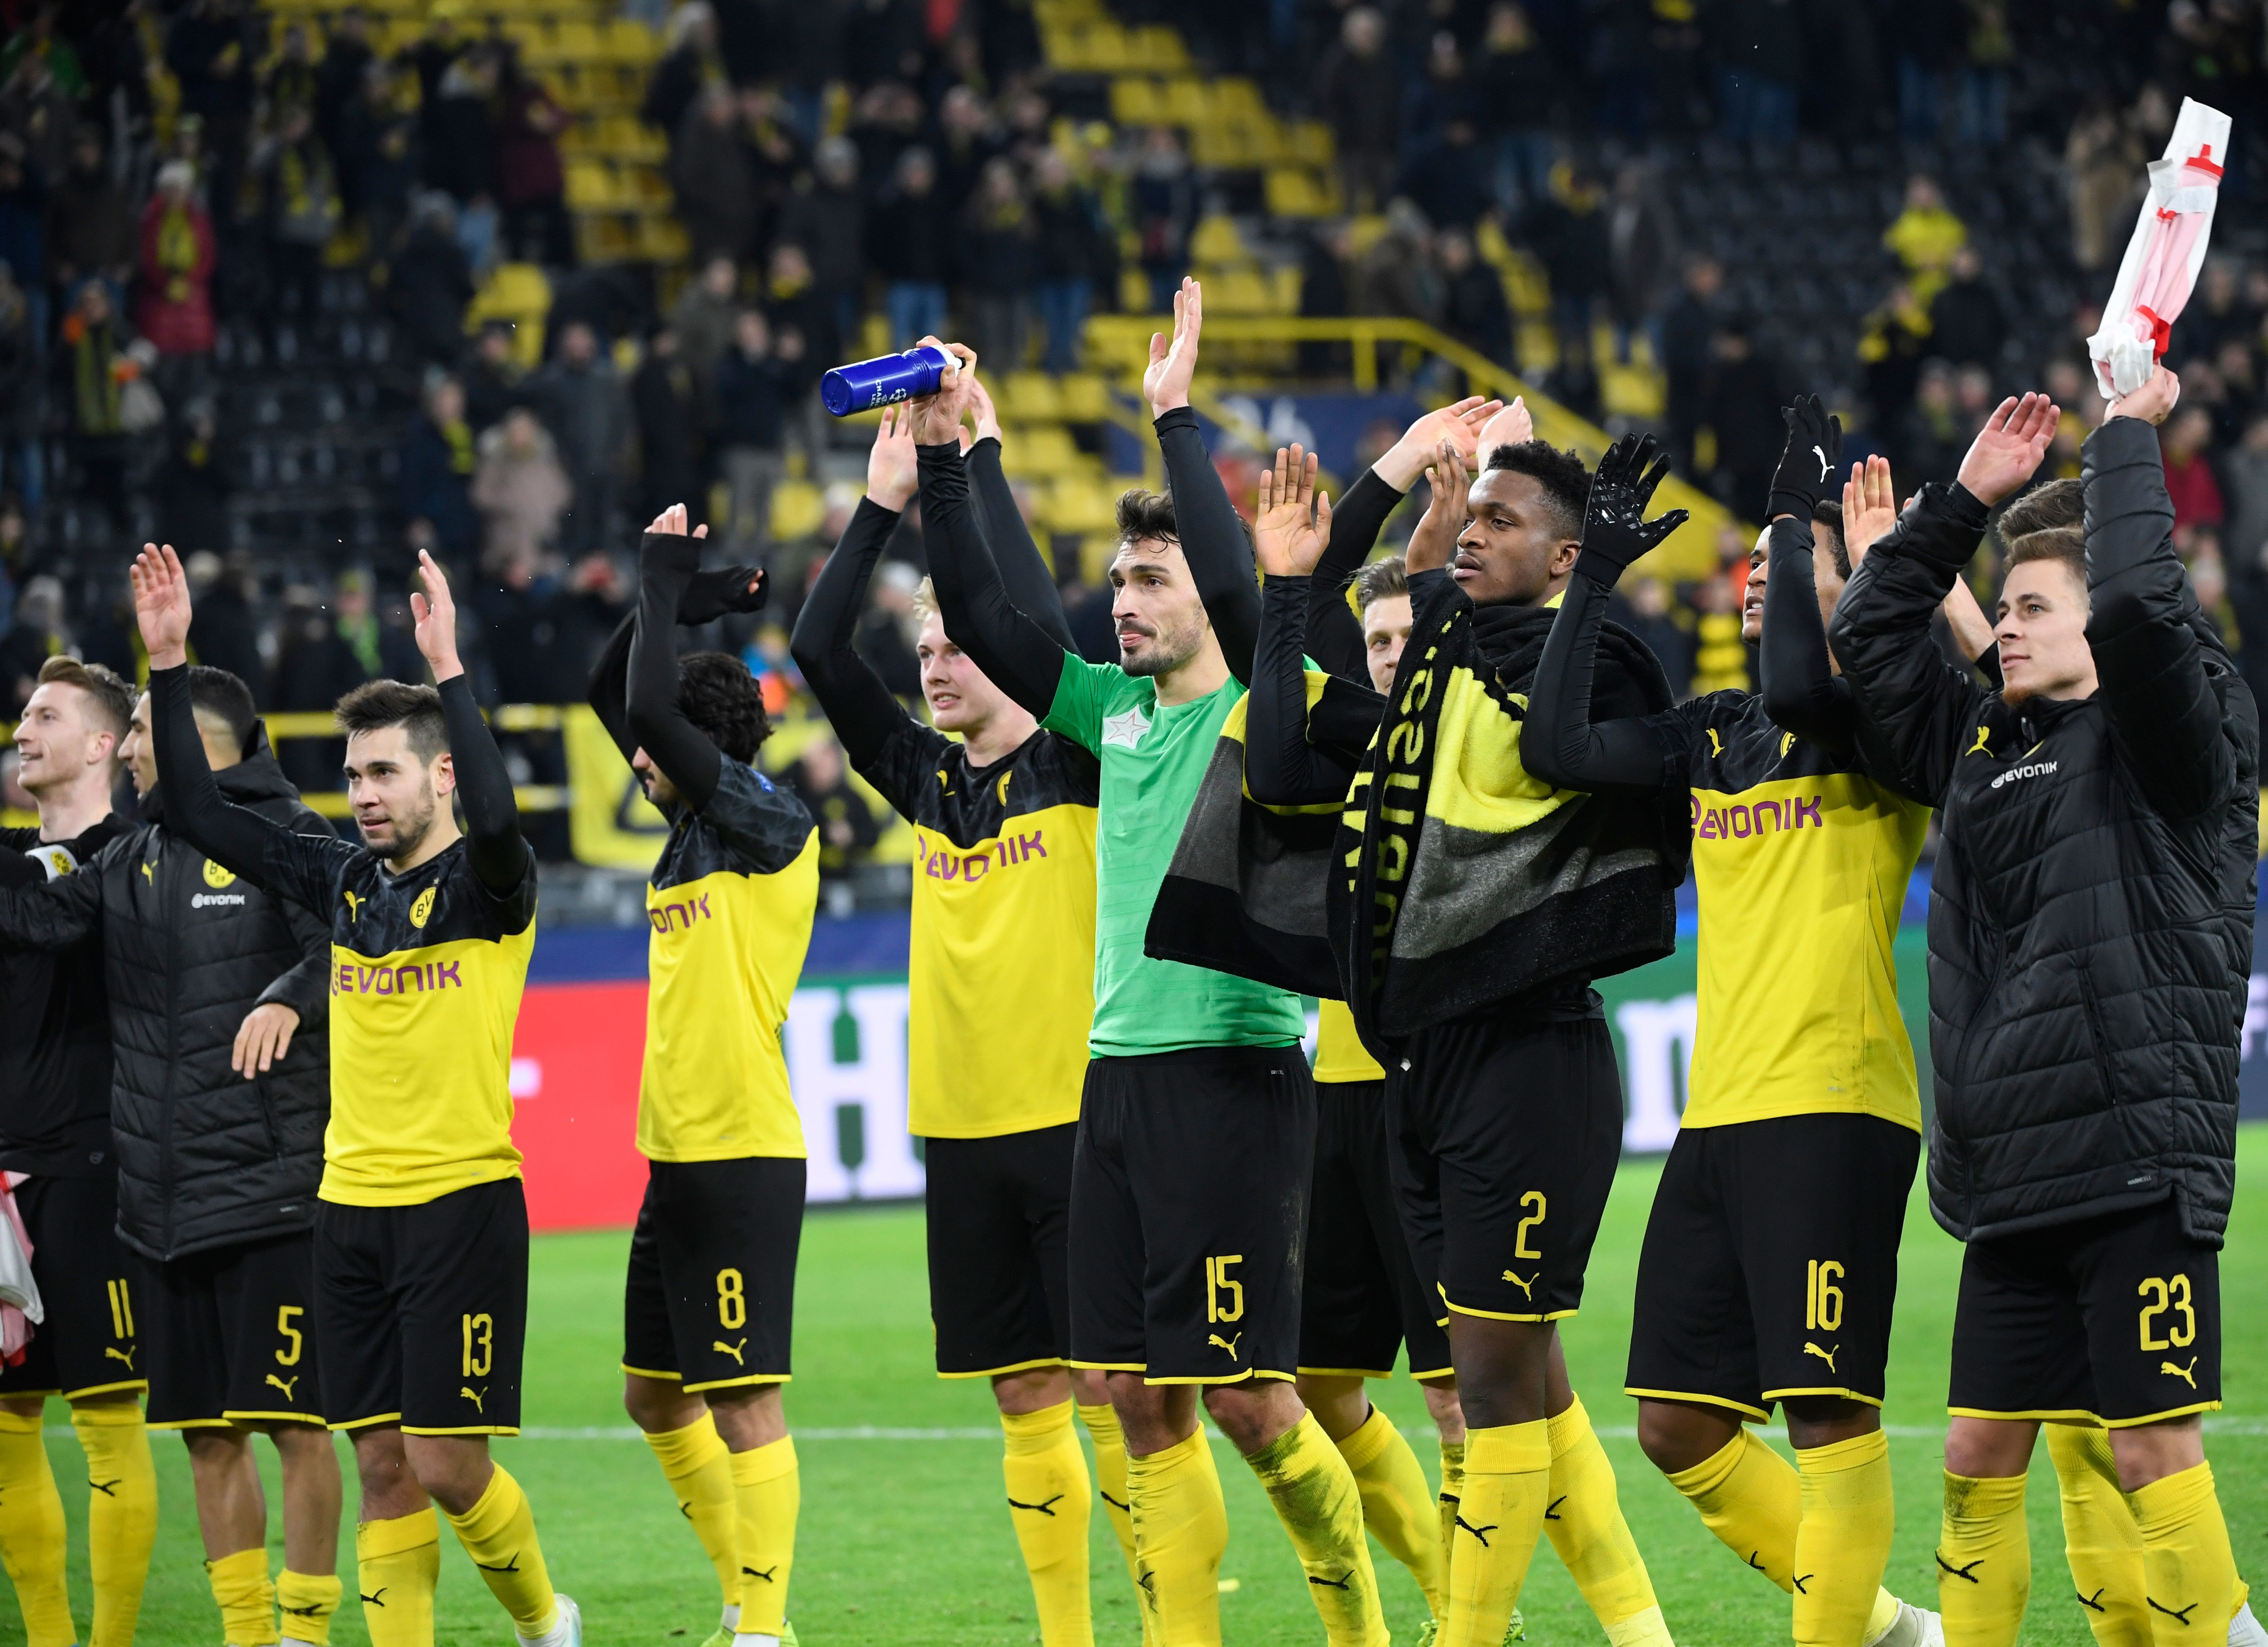 Dortmund's players celebrate after clinching qualification for the last 16